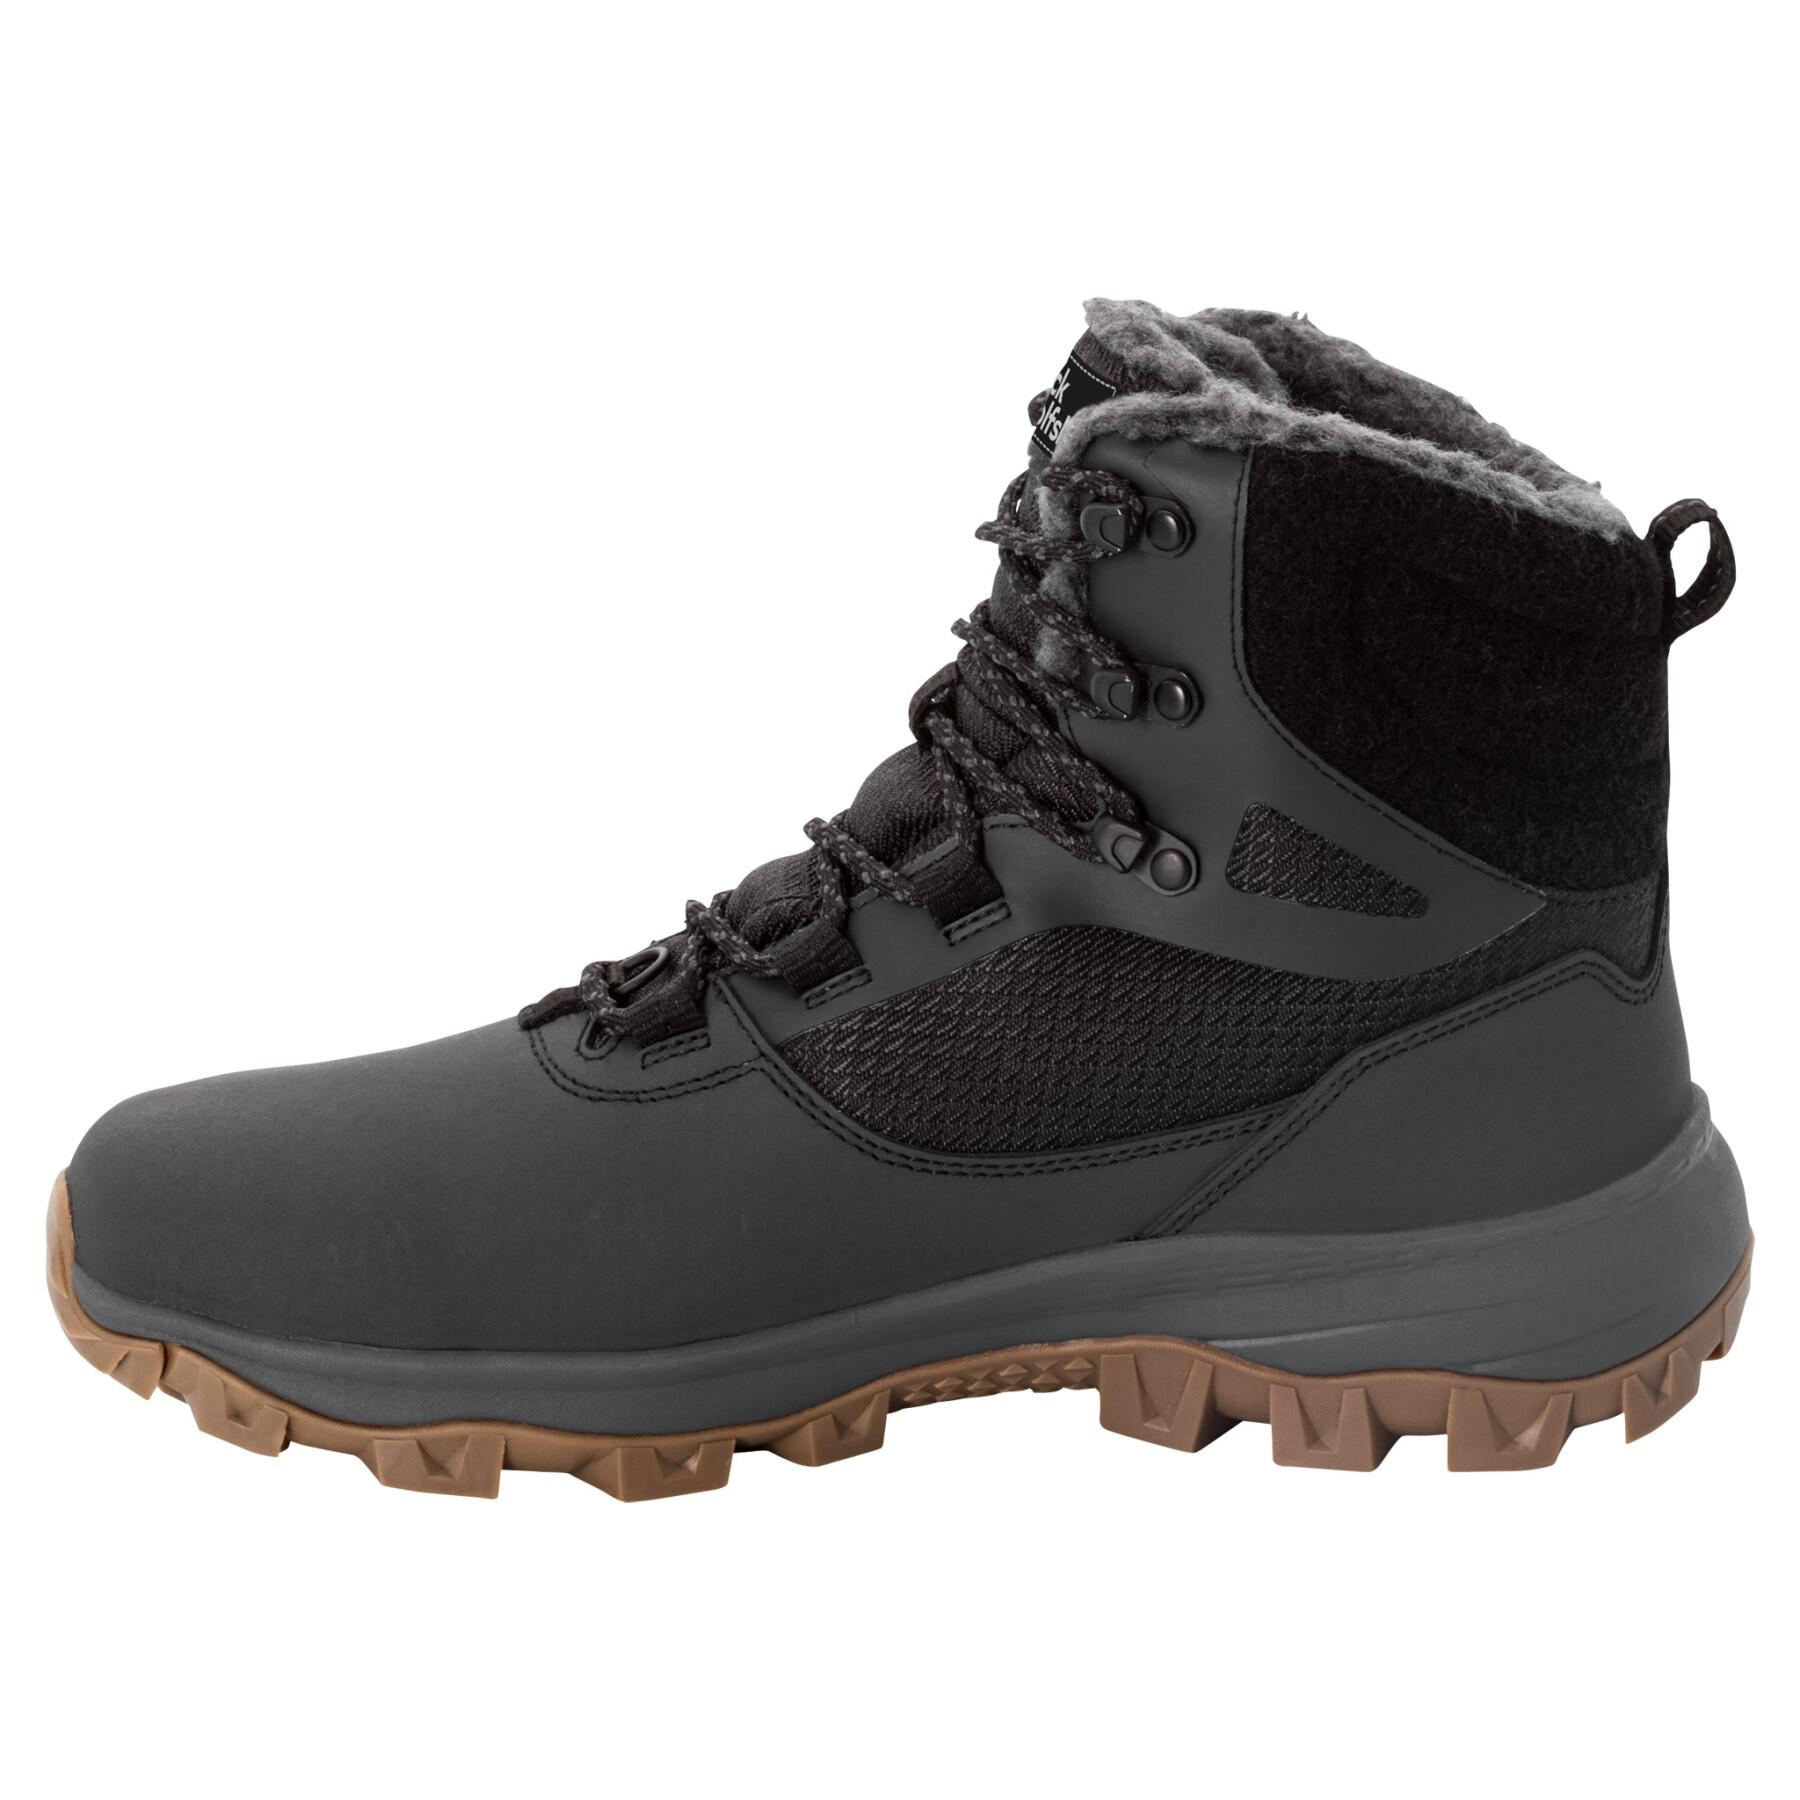 Hiking shoes Jack Wolfskin Everquest Texapore High